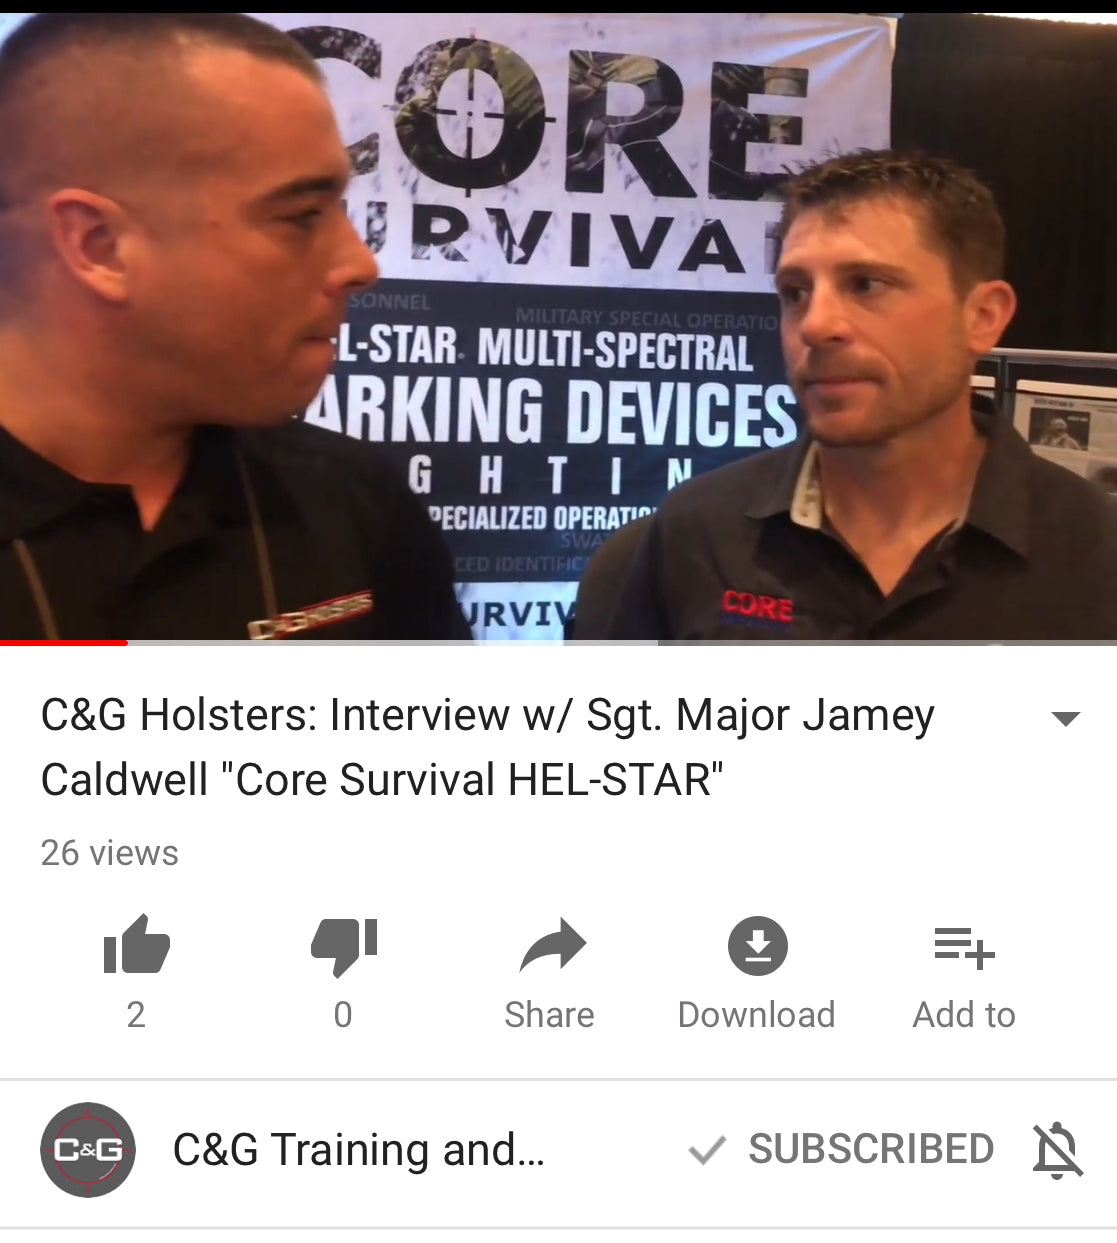 C&G Holsters interview Jamey Caldwell of 1 Minute Out talking about HEL-STAR 6 from CORE Survival at SHOT Show 2018